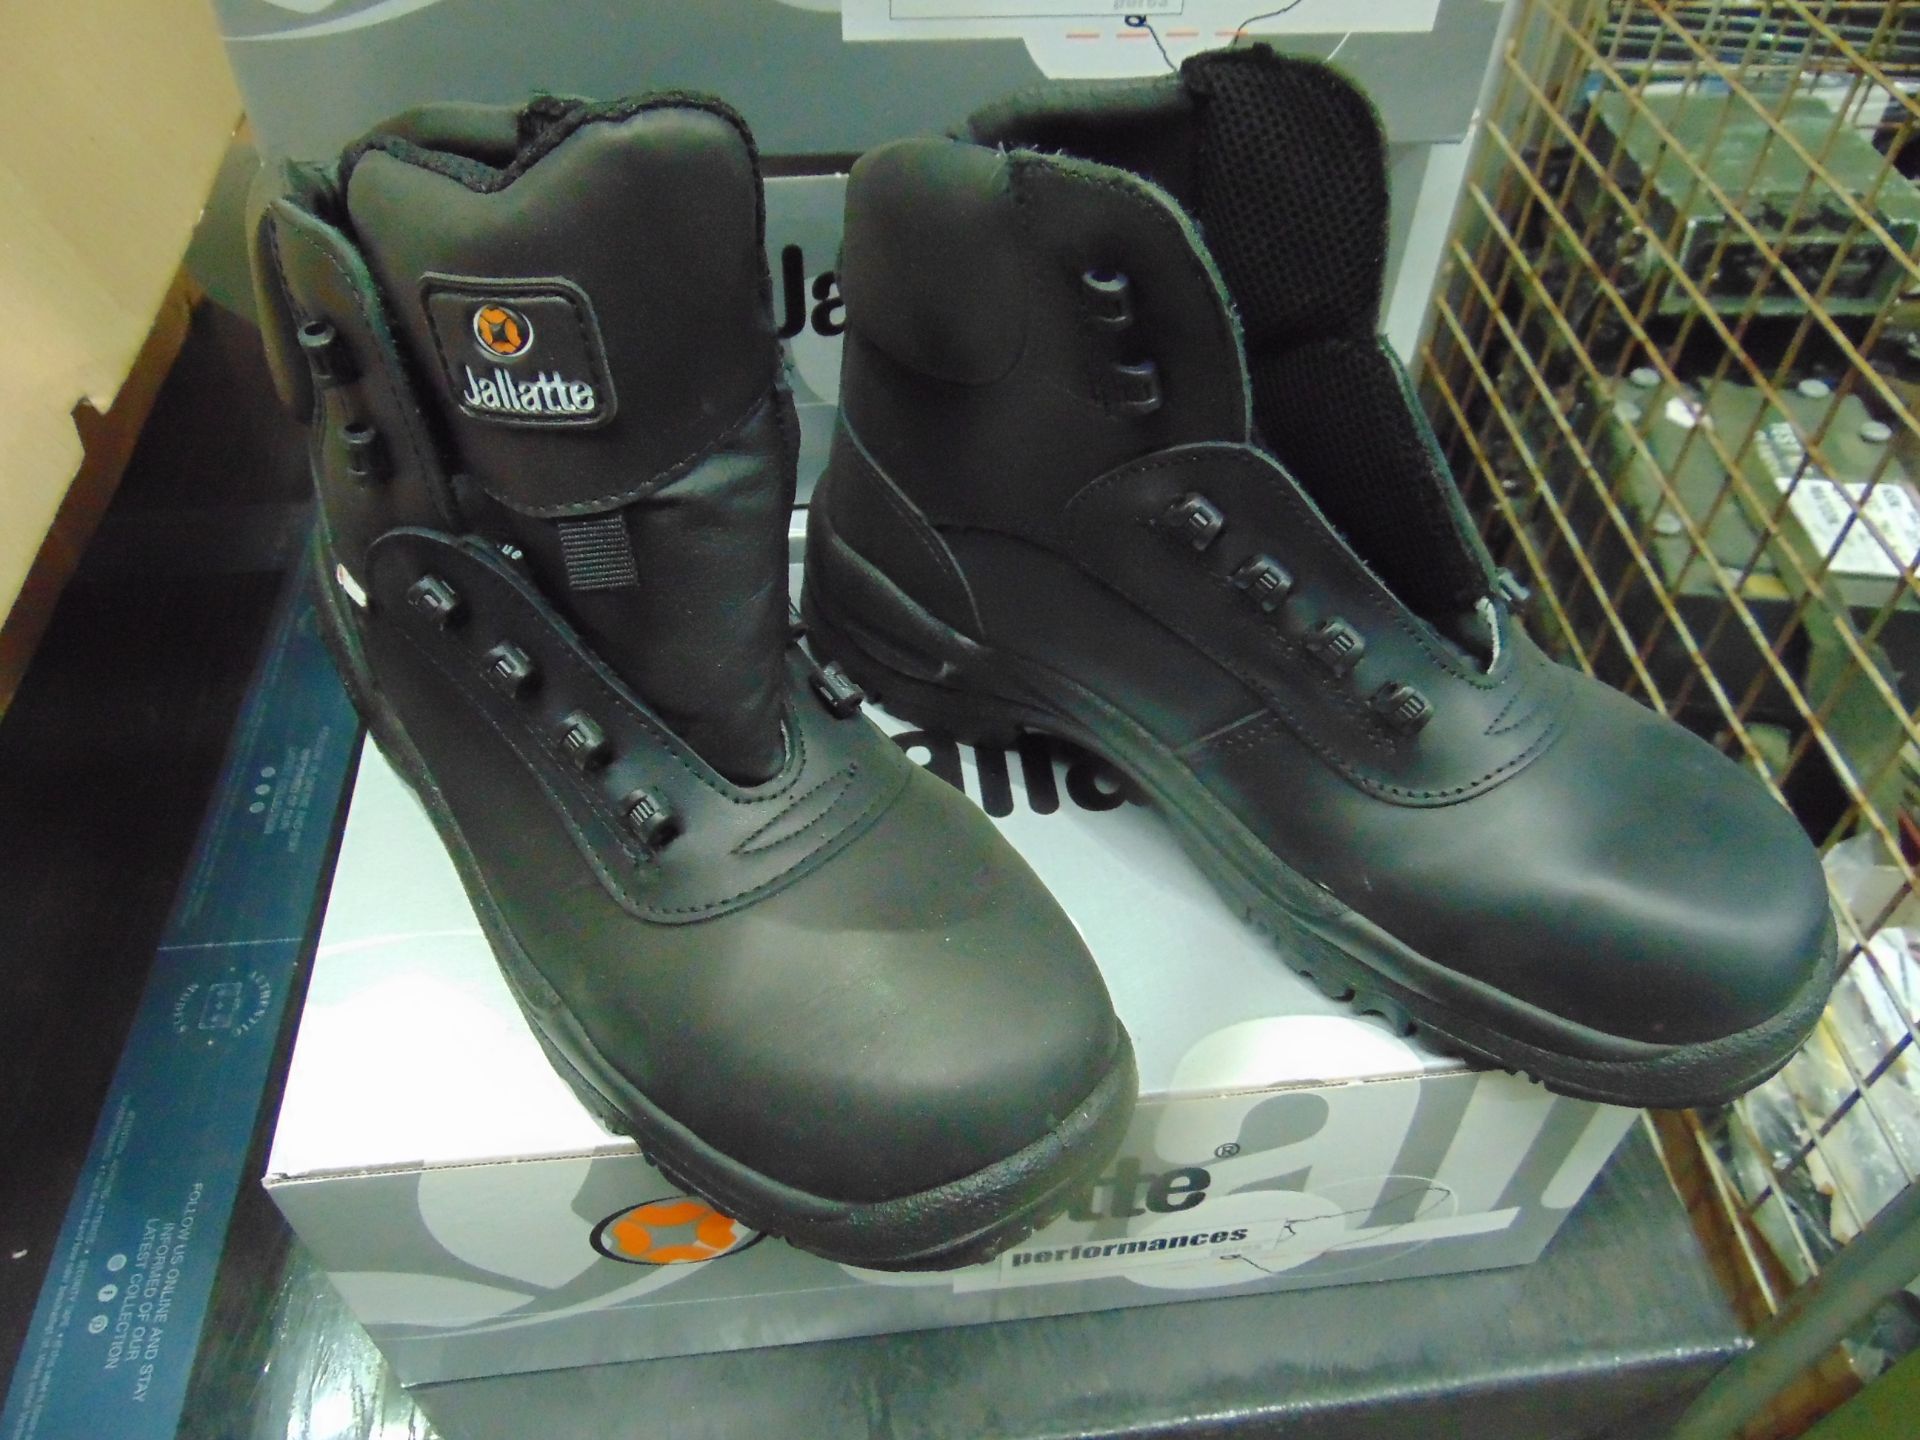 4 PAIRS NEW UNISSUED JALLETTE SAFETY BOOTS SIZE: 40/ or 6 1/2